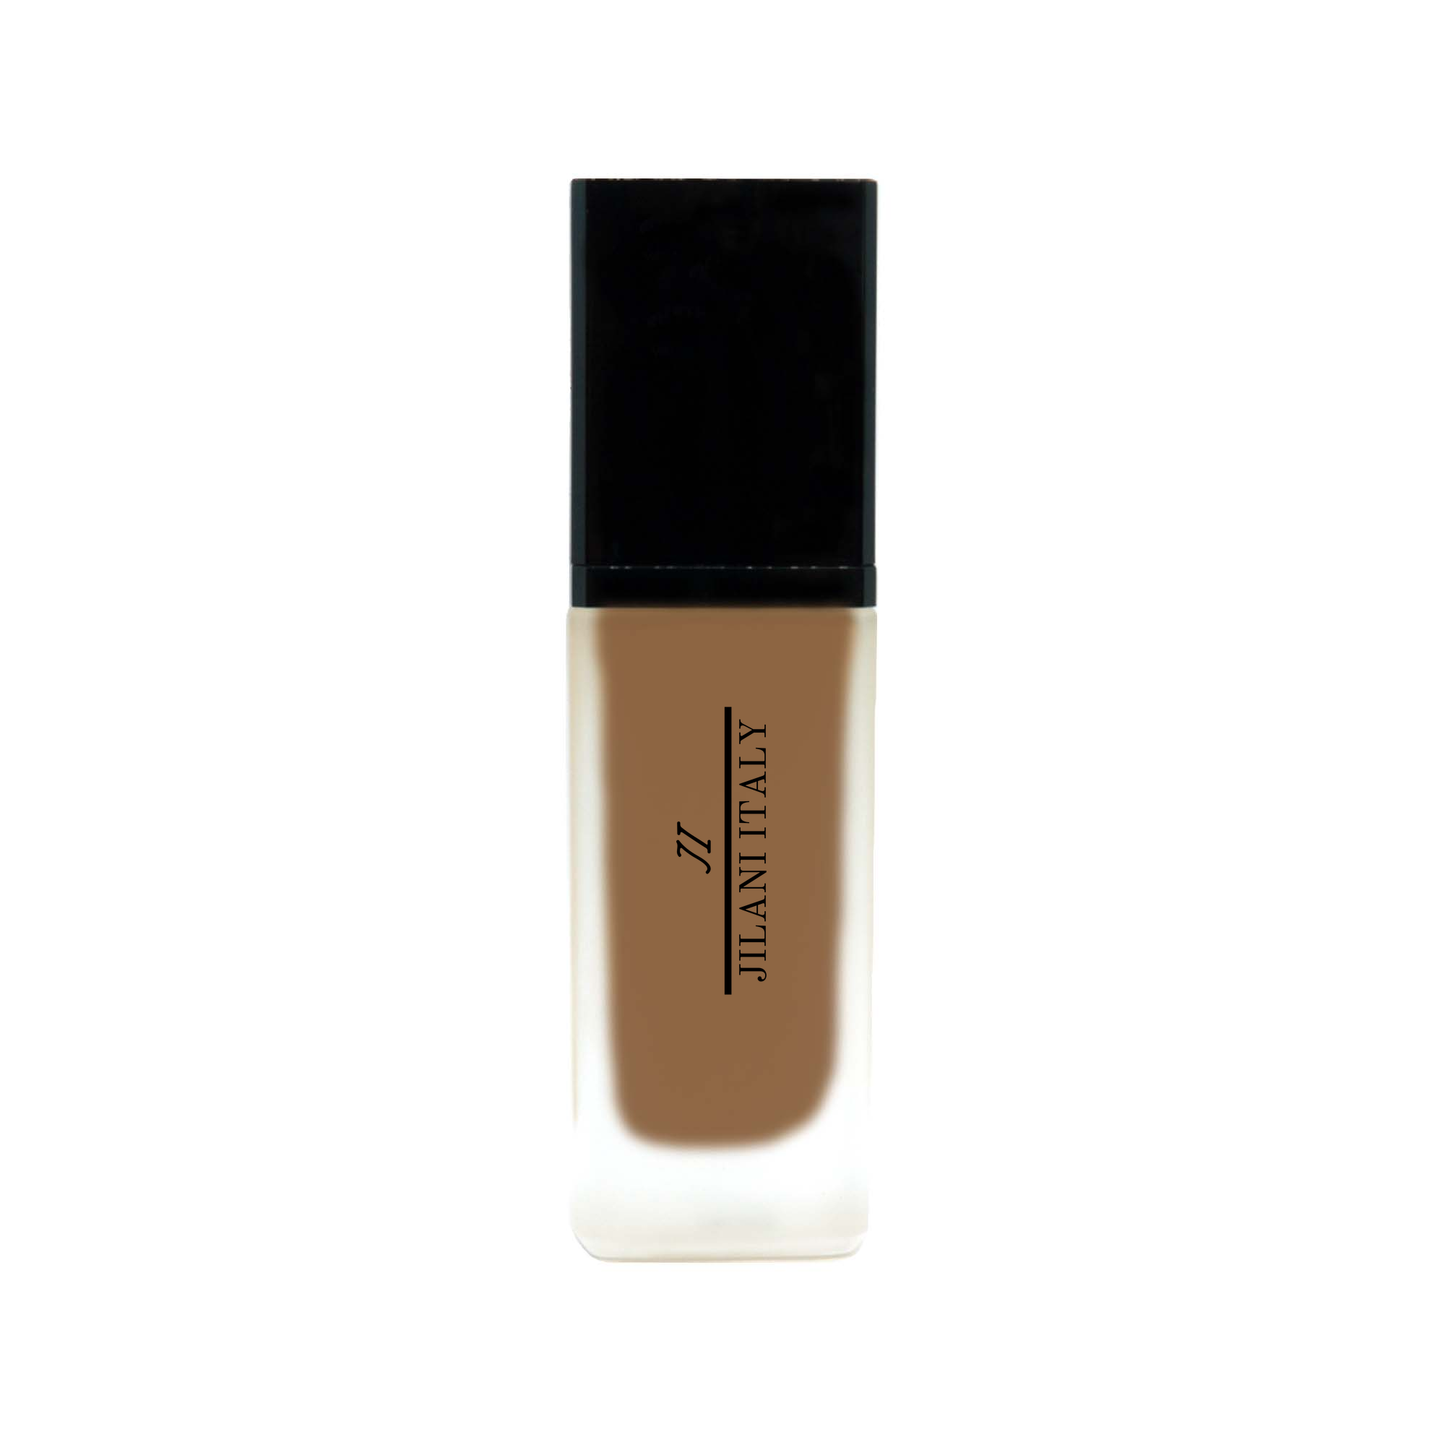 Foundation with SPF - Brunette